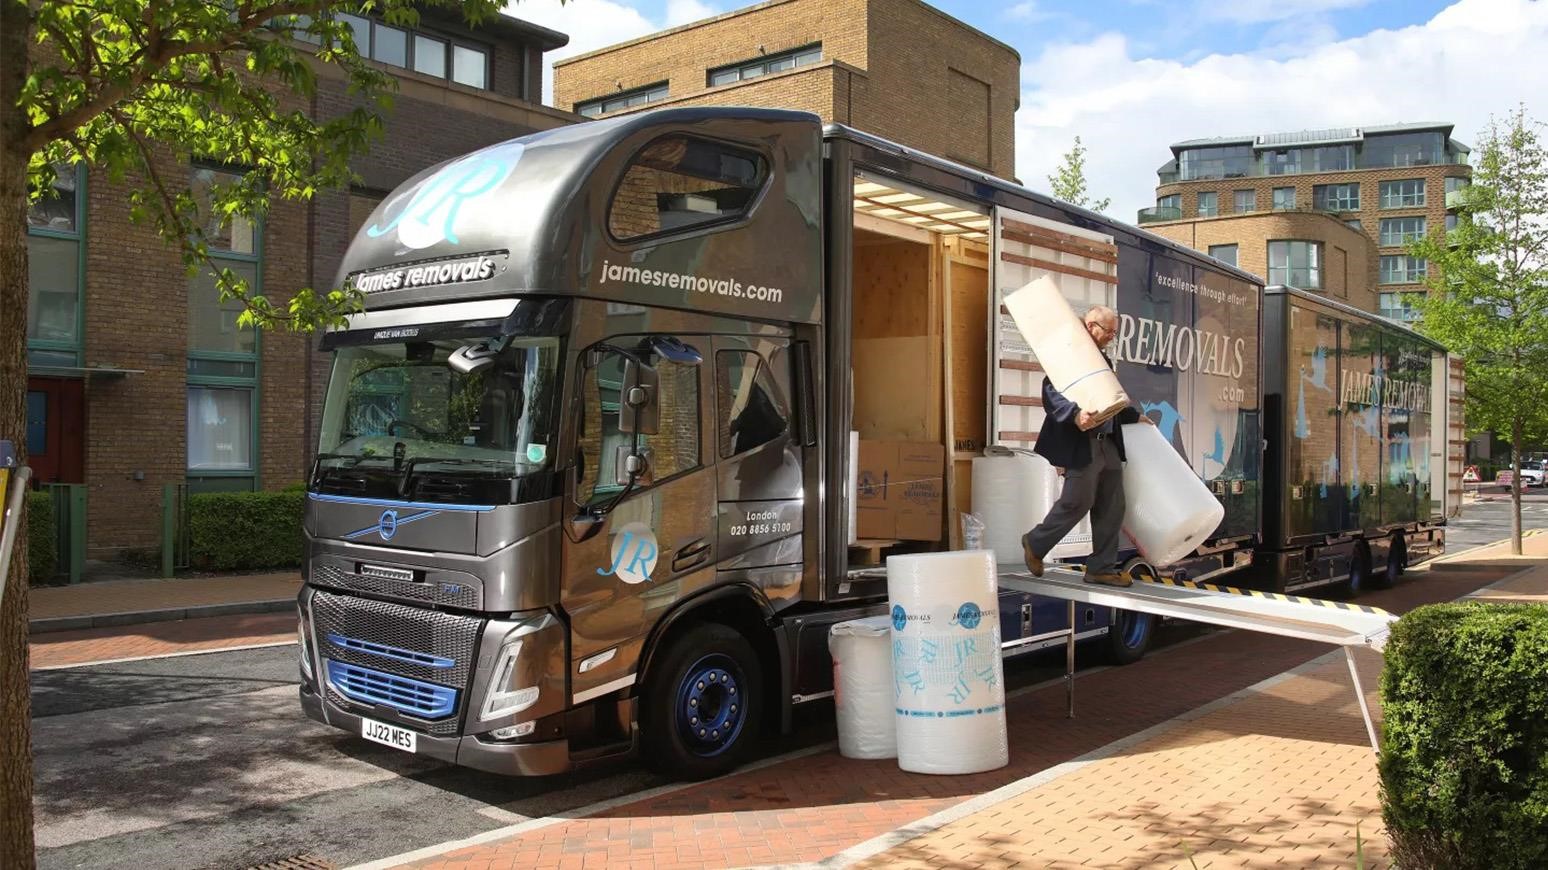 Volvo FM 430 Rigid Truck With 3-Star DVS Rating Goes To Work For London’s James Removals